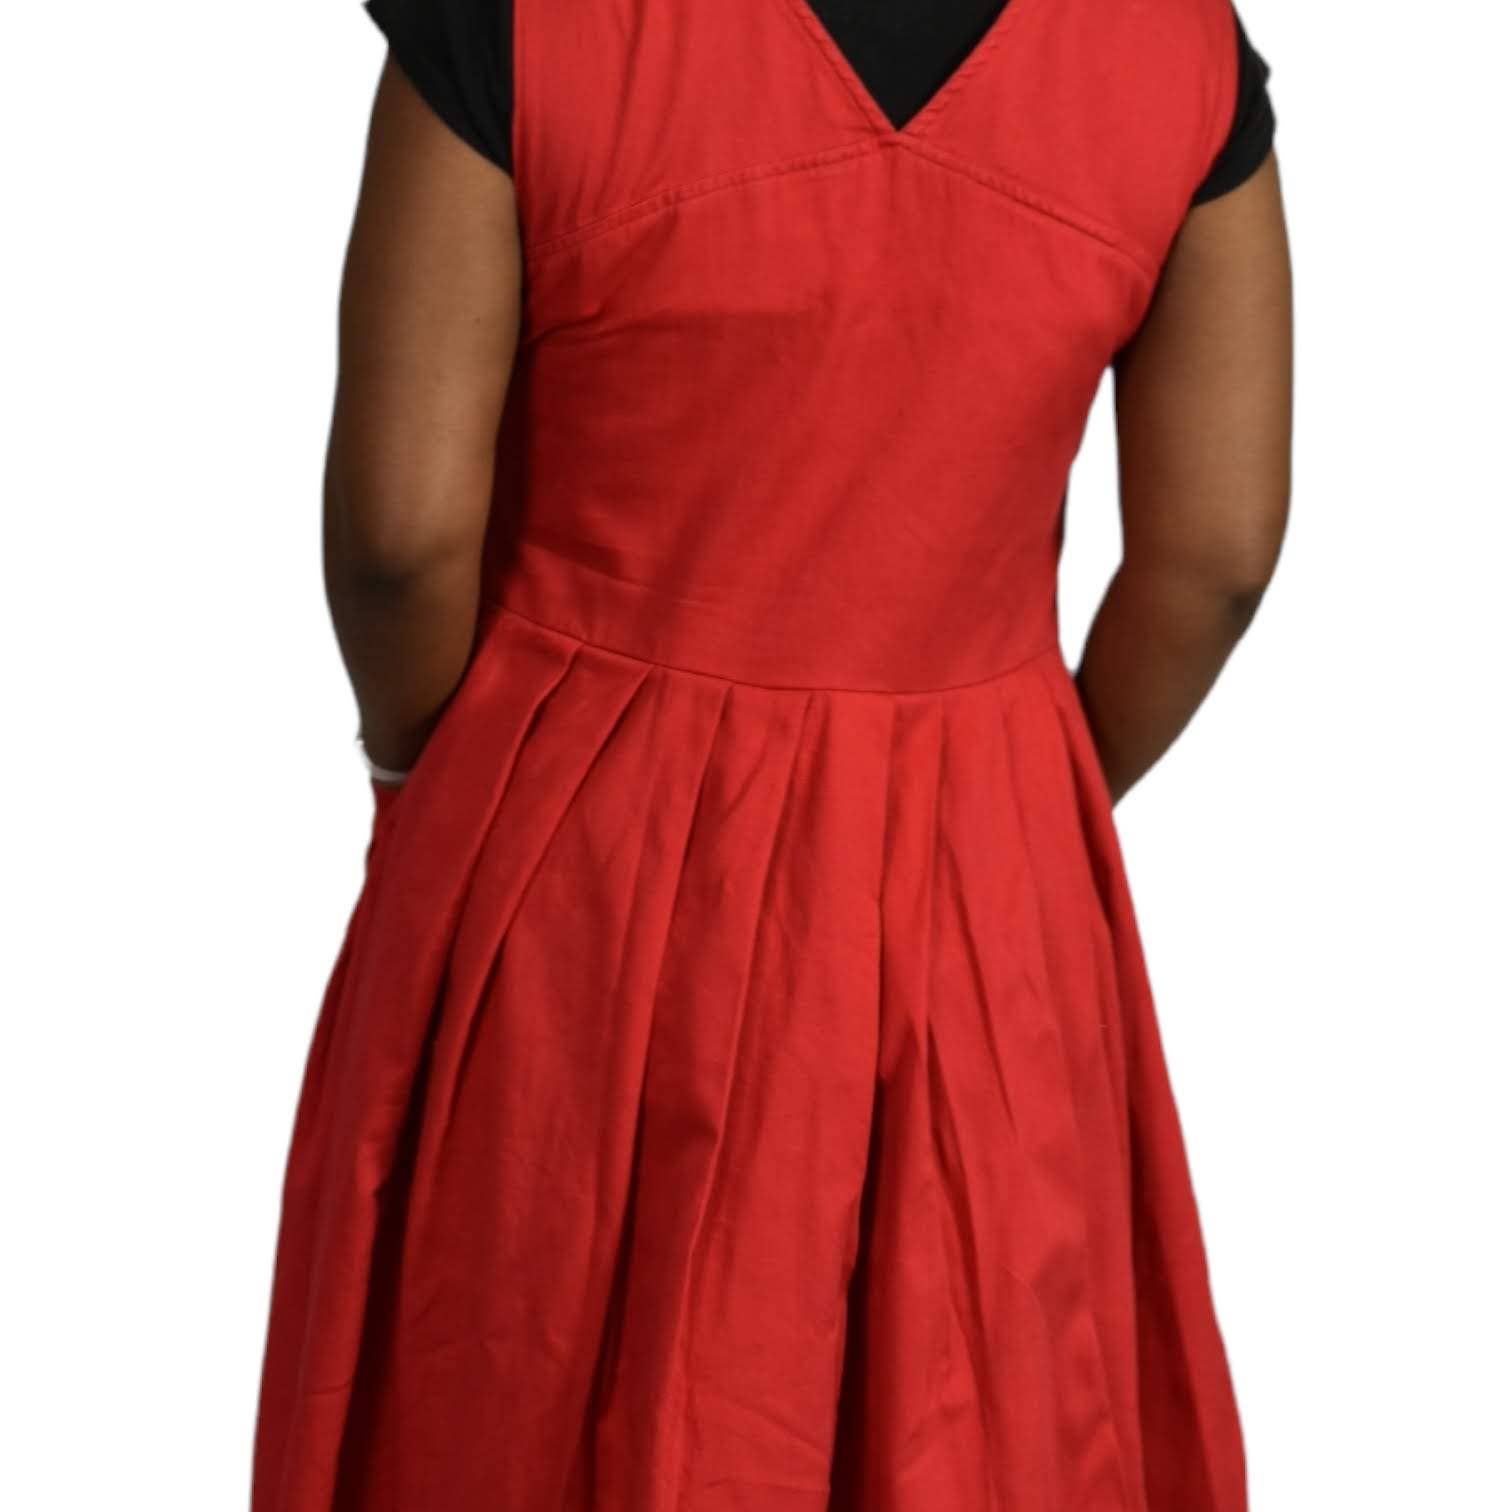 Homemade Jumper Dress Vintage Red Button Front Pinafore Midi Pockets Size Small